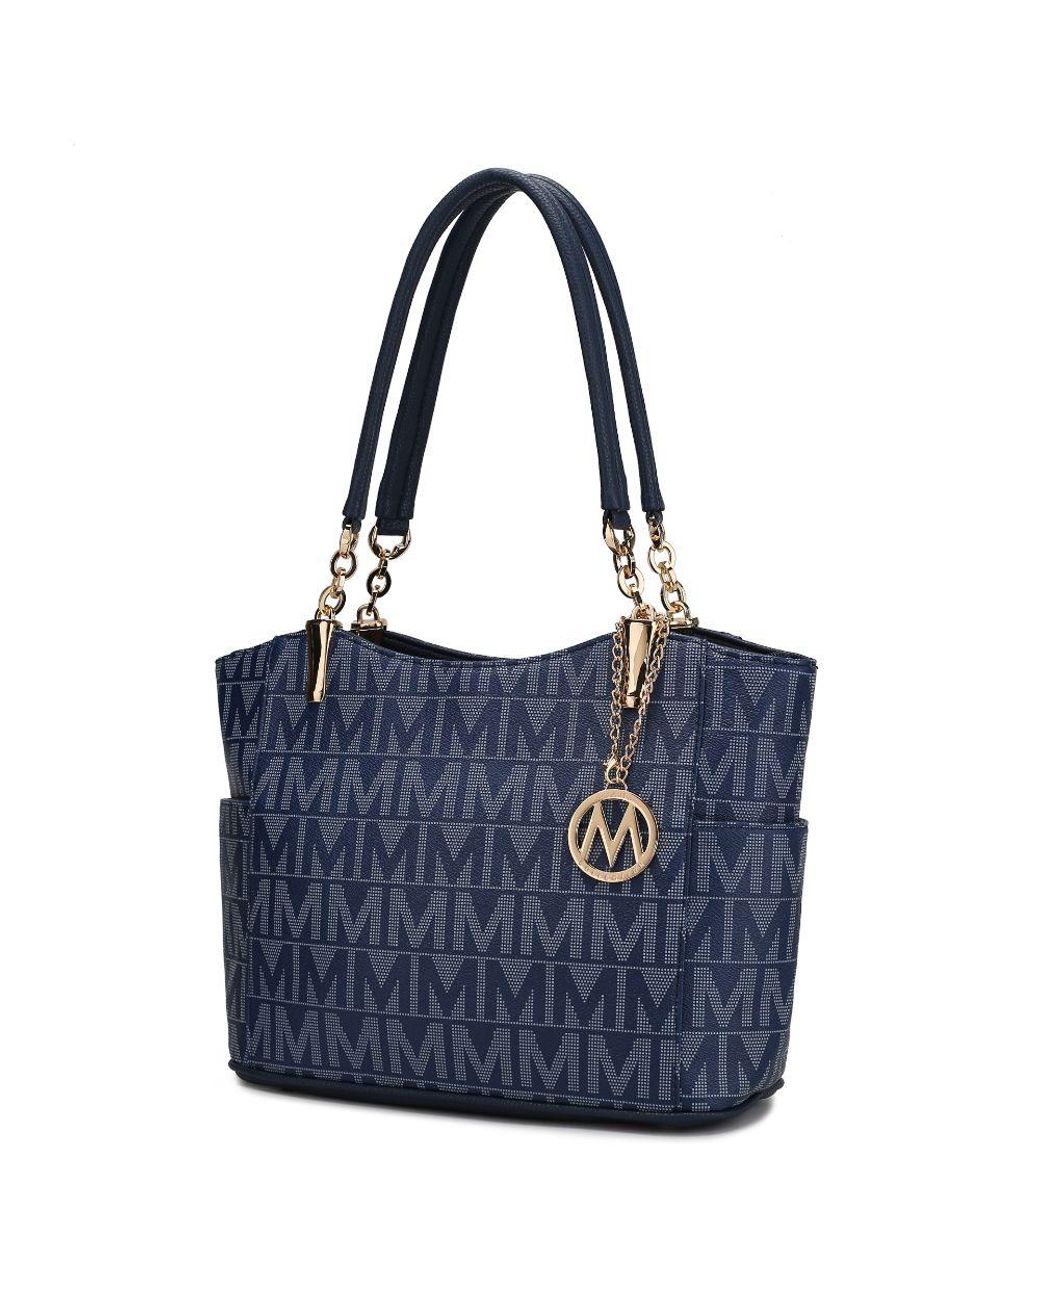 MKF Collection by Mia K. Women's Lady M Signature Tote Set